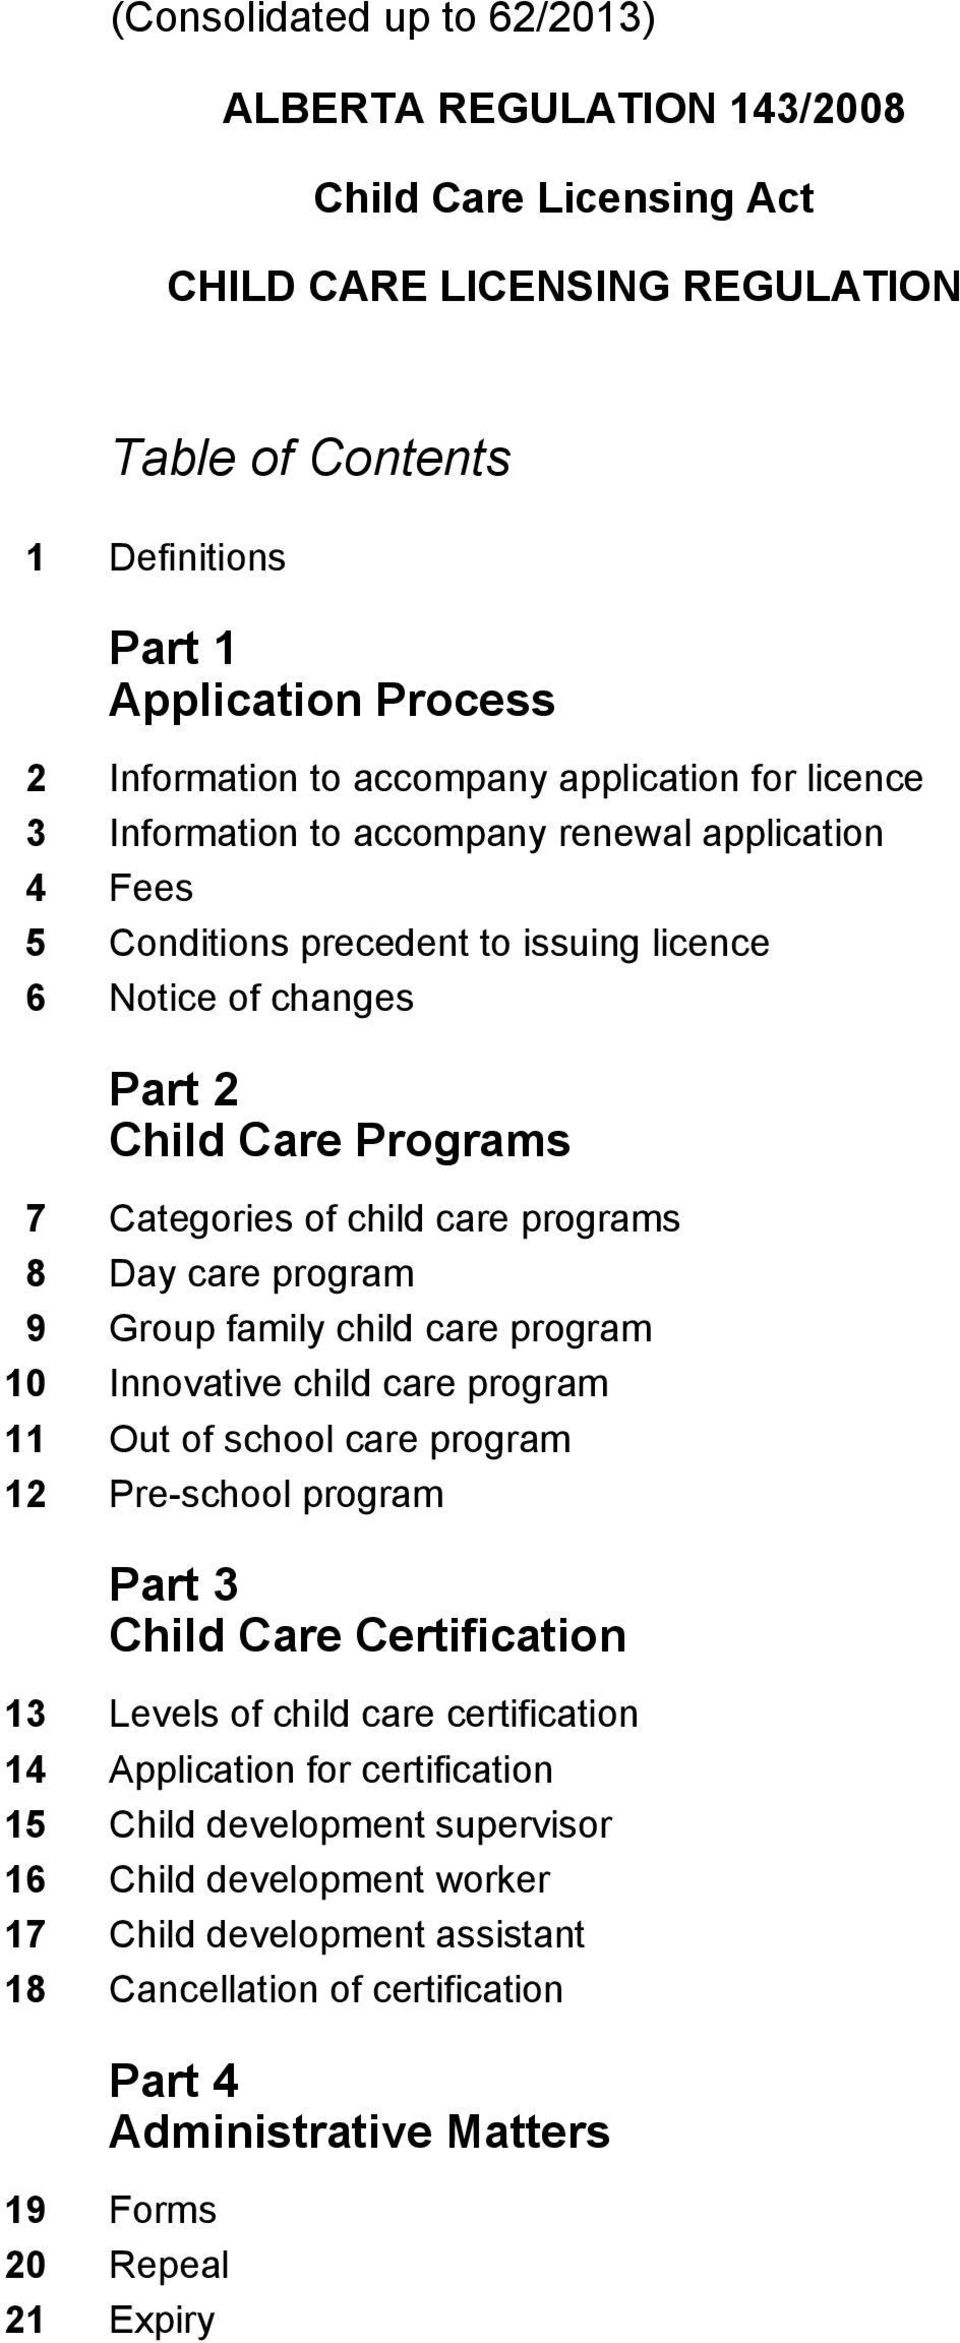 programs 8 Day care program 9 Group family child care program 10 Innovative child care program 11 Out of school care program 12 Pre-school program Part 3 Child Care Certification 13 Levels of child